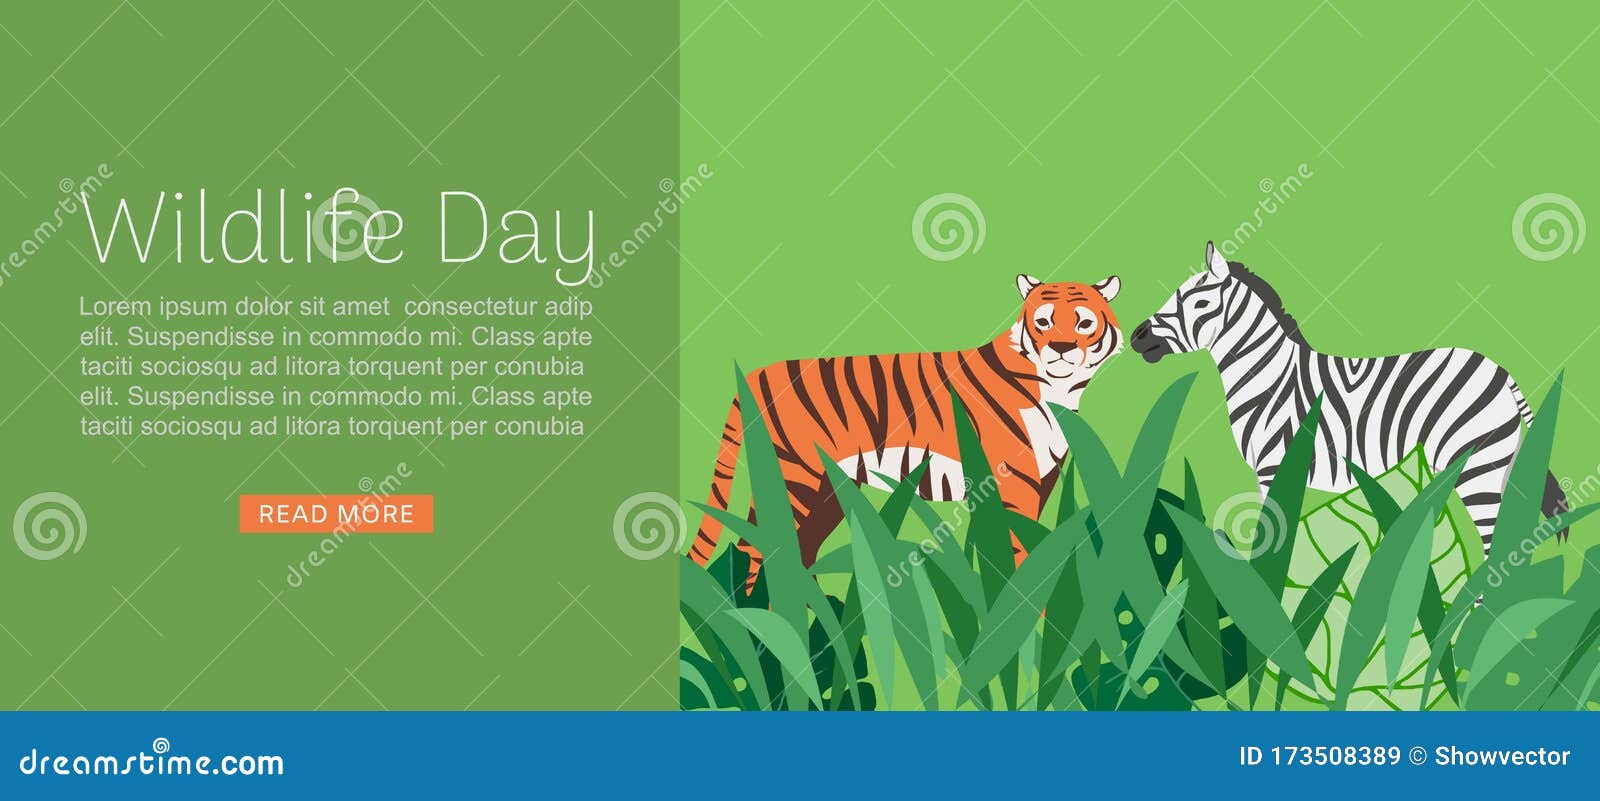 Wildlife Day Web Banner Vector Illustration. Cartoon Wild Tiger and Zebra  with Abstract African Jungle Decoration for Stock Vector - Illustration of  ecology, fauna: 173508389